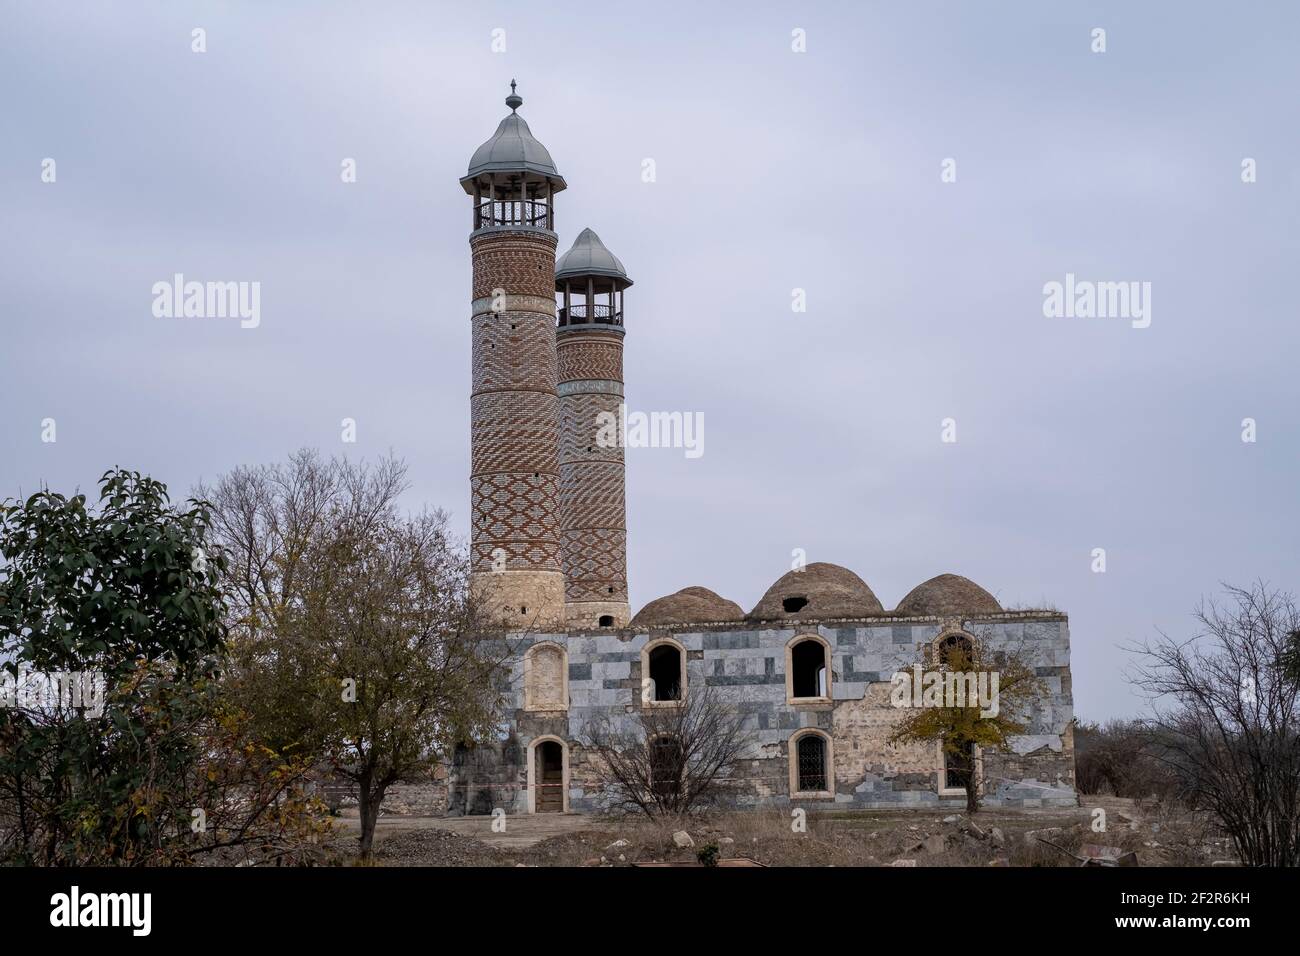 AGDAM, AZERBAIJAN - DECEMBER 14: Exterior of the19th century Juma Mosque the only building left standing in the town of Agdam which was destroyed by Armenian forces during the First Nagorno-Karabakh War on December 14, 2020 in Agdam, Azerbaijan. The town and its surrounding district were returned to Azerbaijani control as part of an agreement that ended the 2020 Nagorno-Karabakh War. Stock Photo